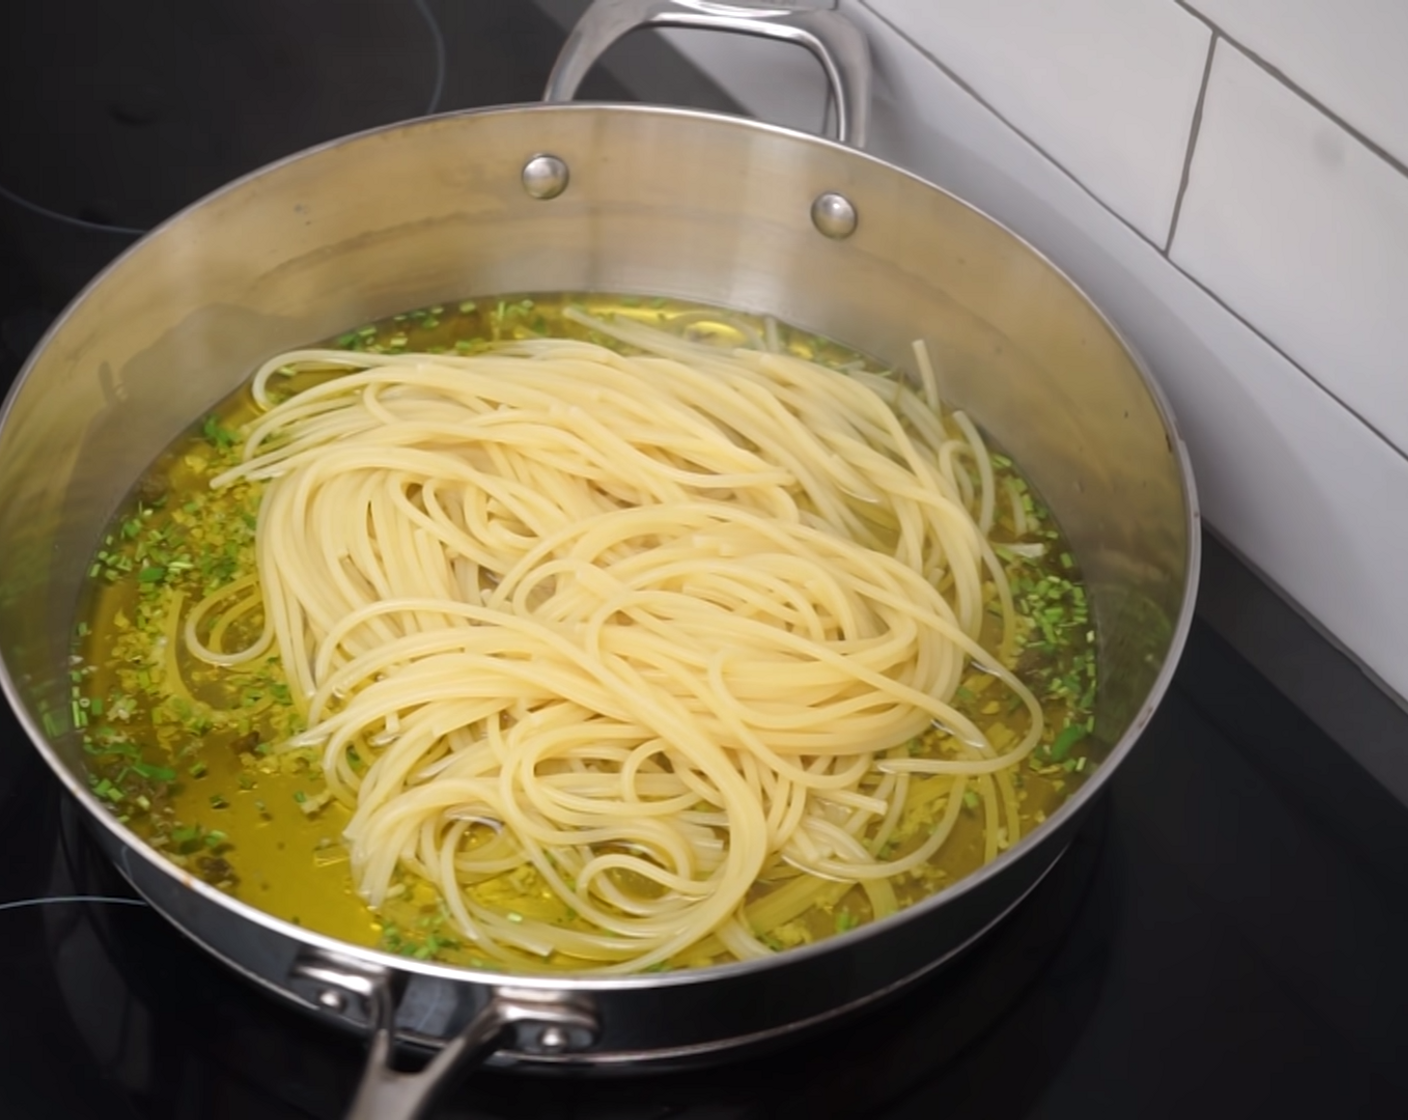 step 6 Keep an eye on the pasta cooking, and cook it between 30 seconds to 1 minute less than the packet instructions, before straining and adding it to the pan. You can use a set of long tongs to do this, adding a small amount of pasta water as you transfer the spaghetti.